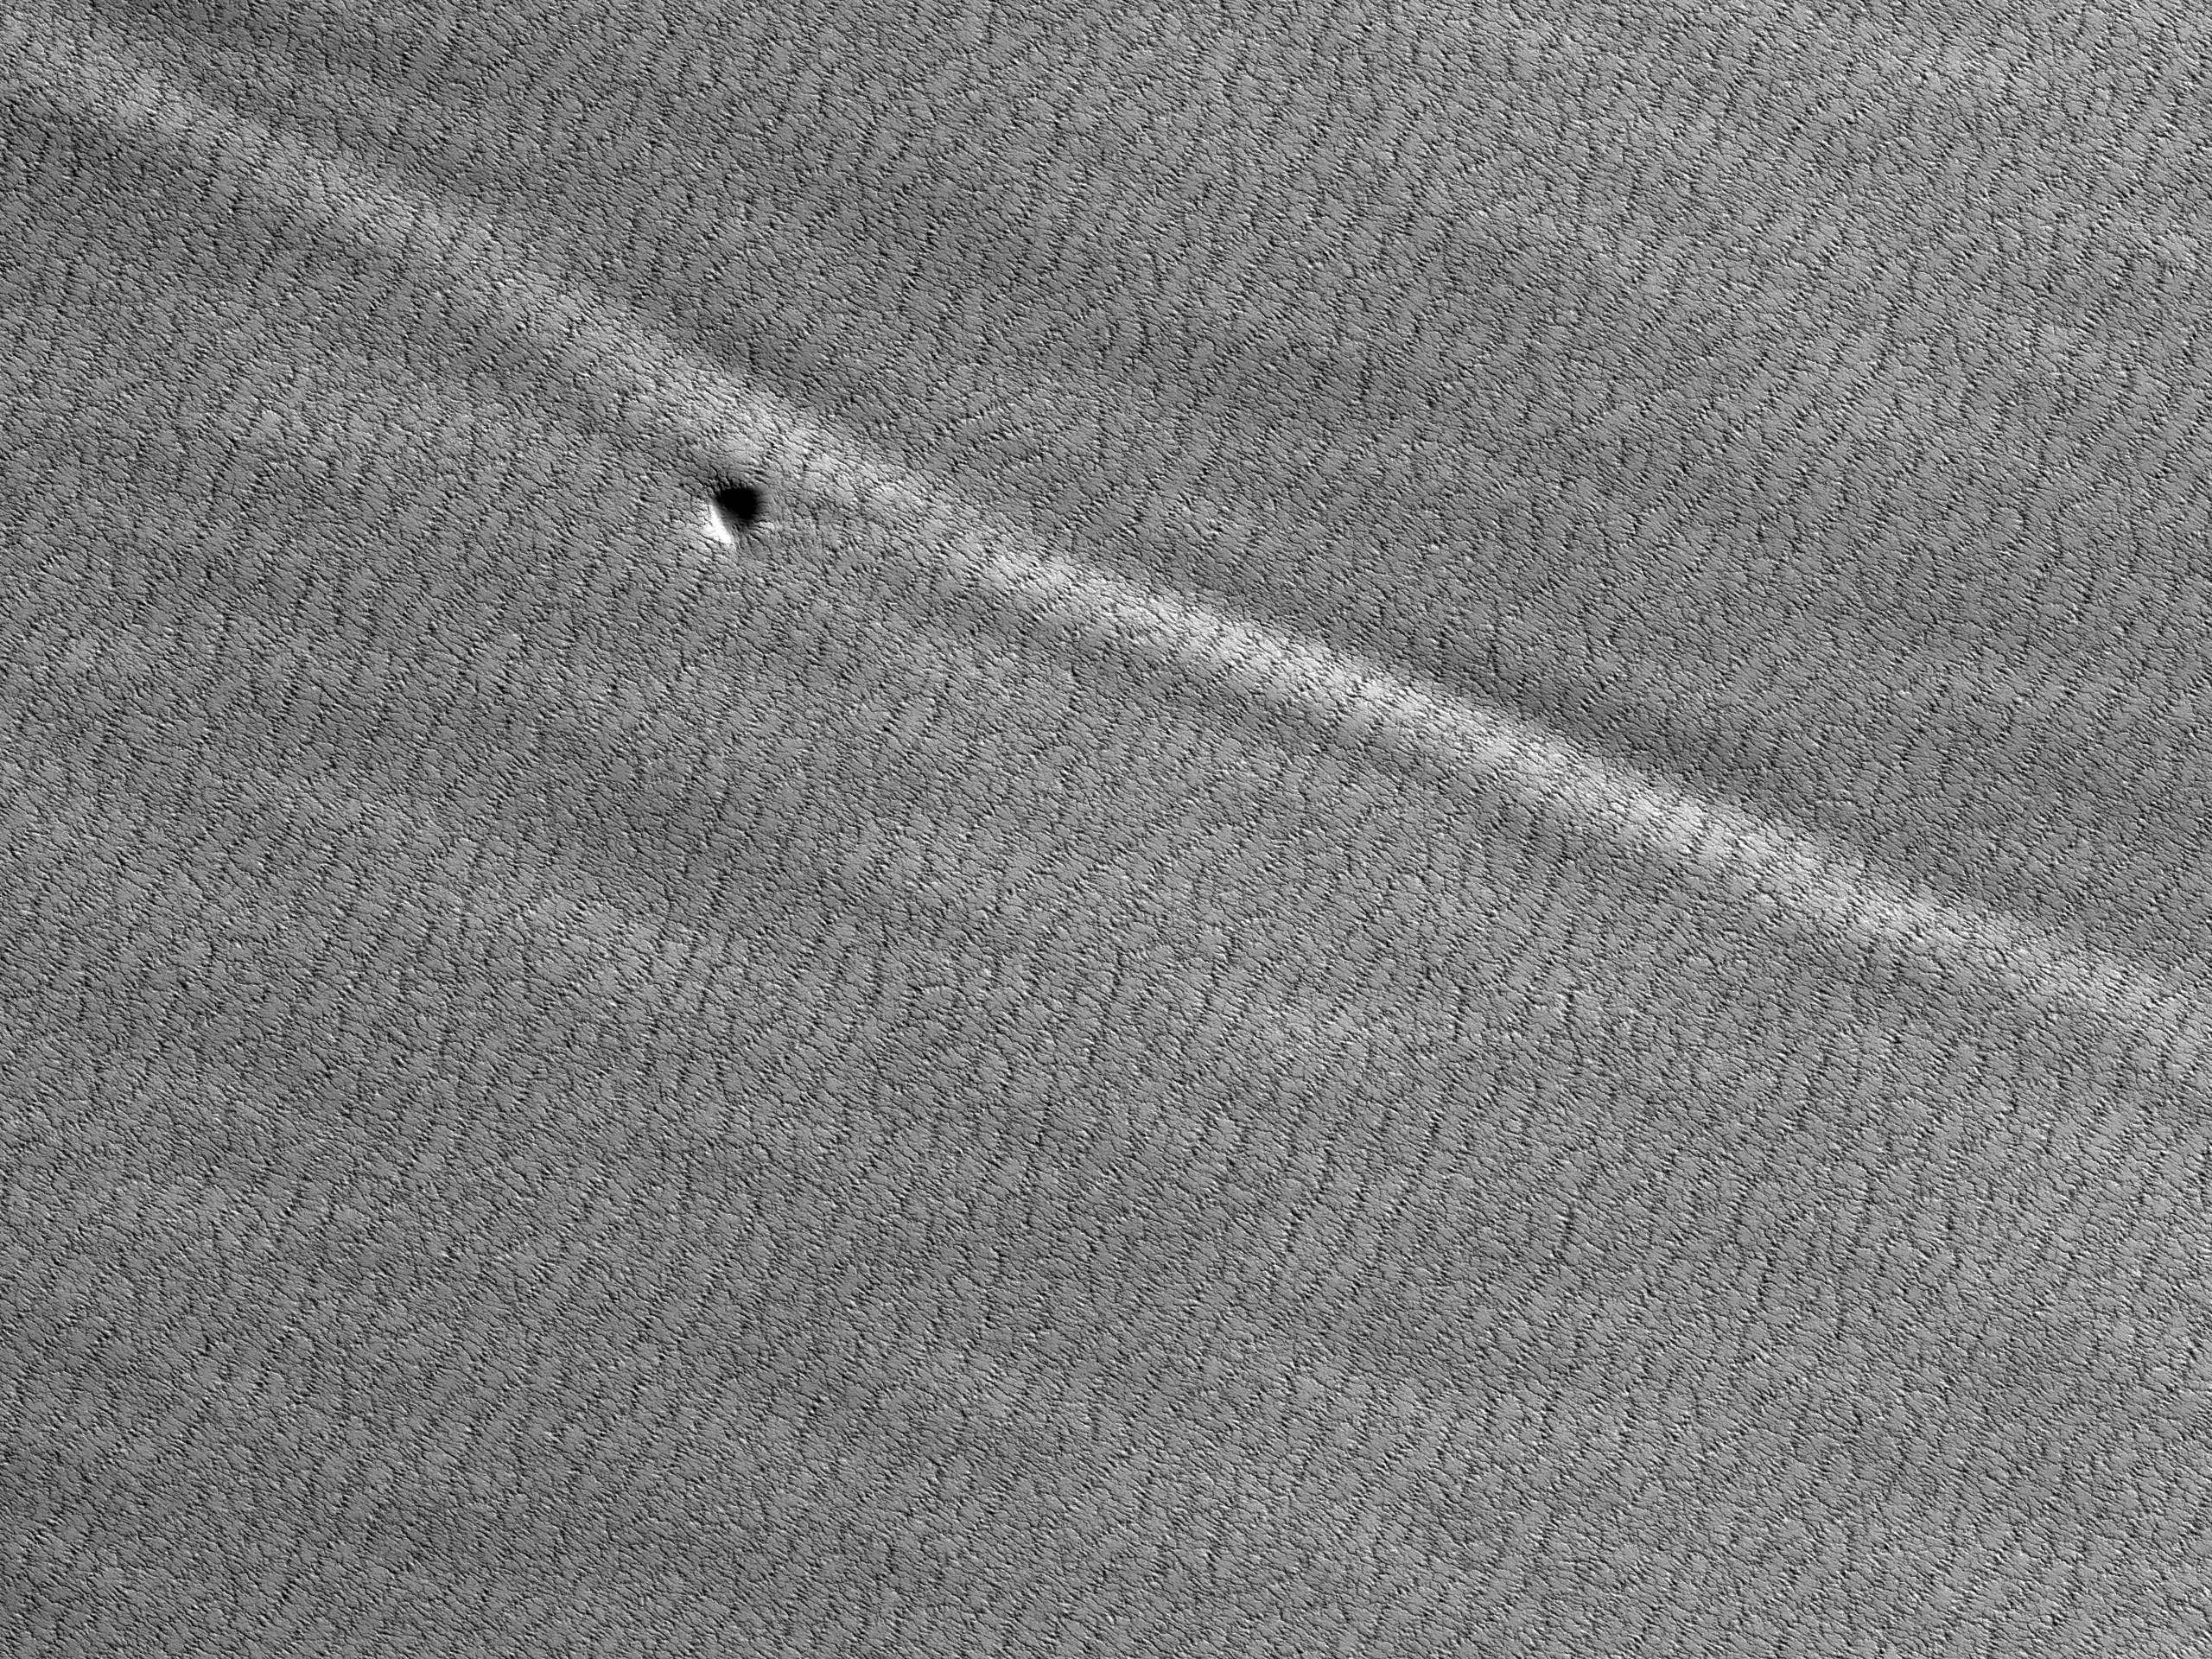 A Mysterious Bright Streak on the South Polar Layered Deposits